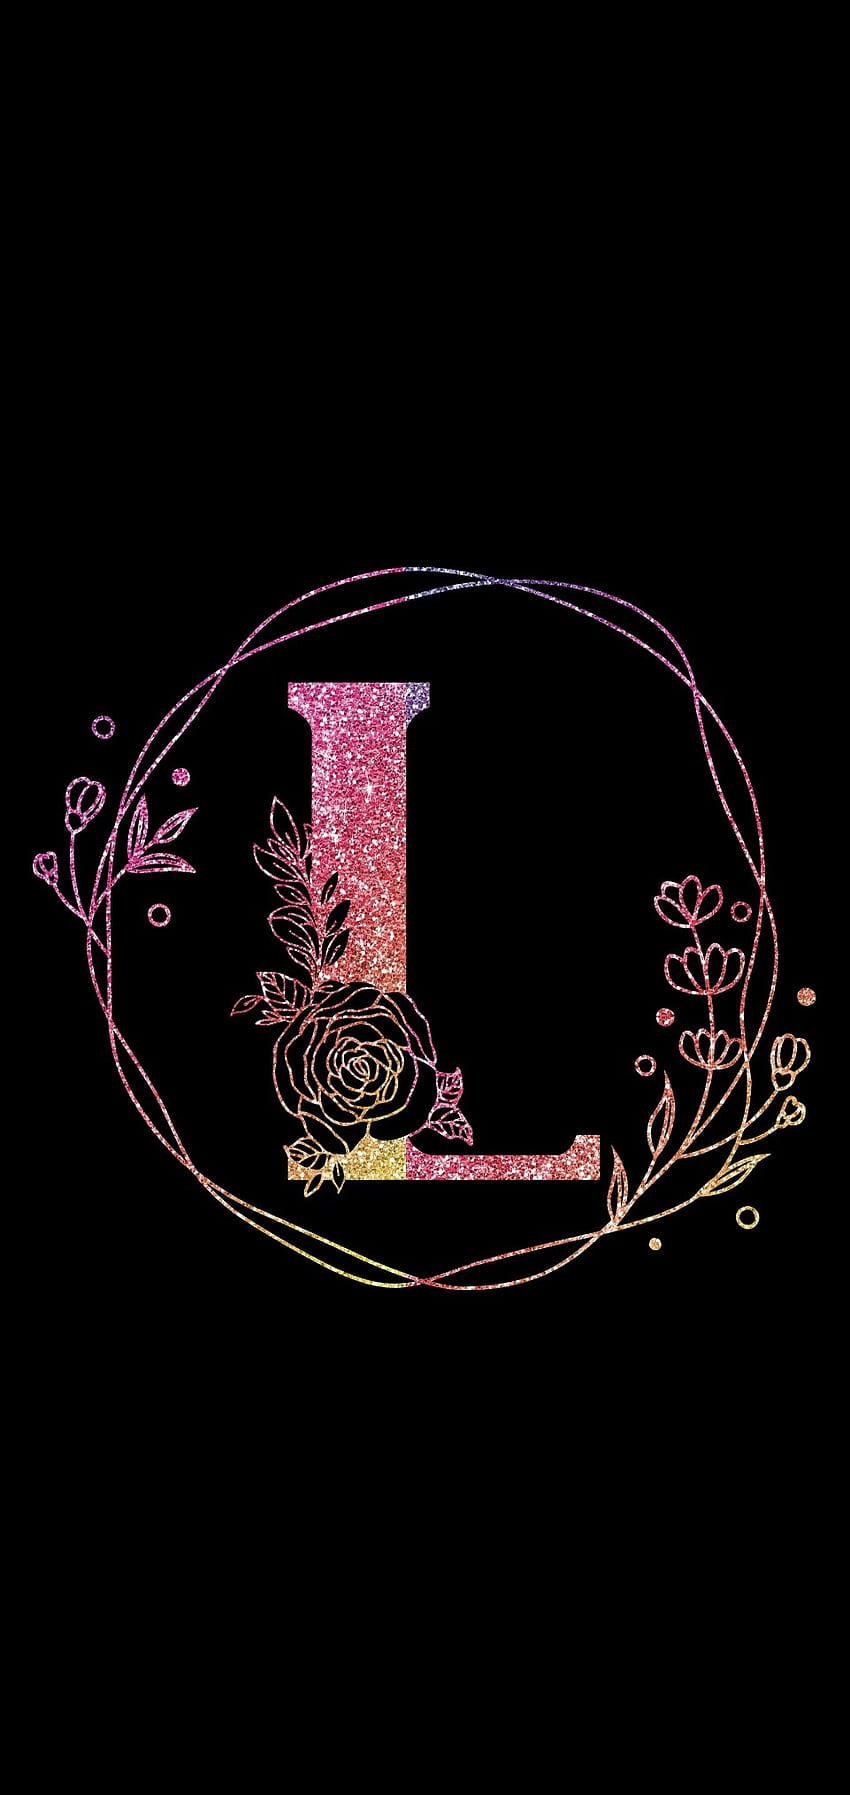 letter l wallpapers for mobile